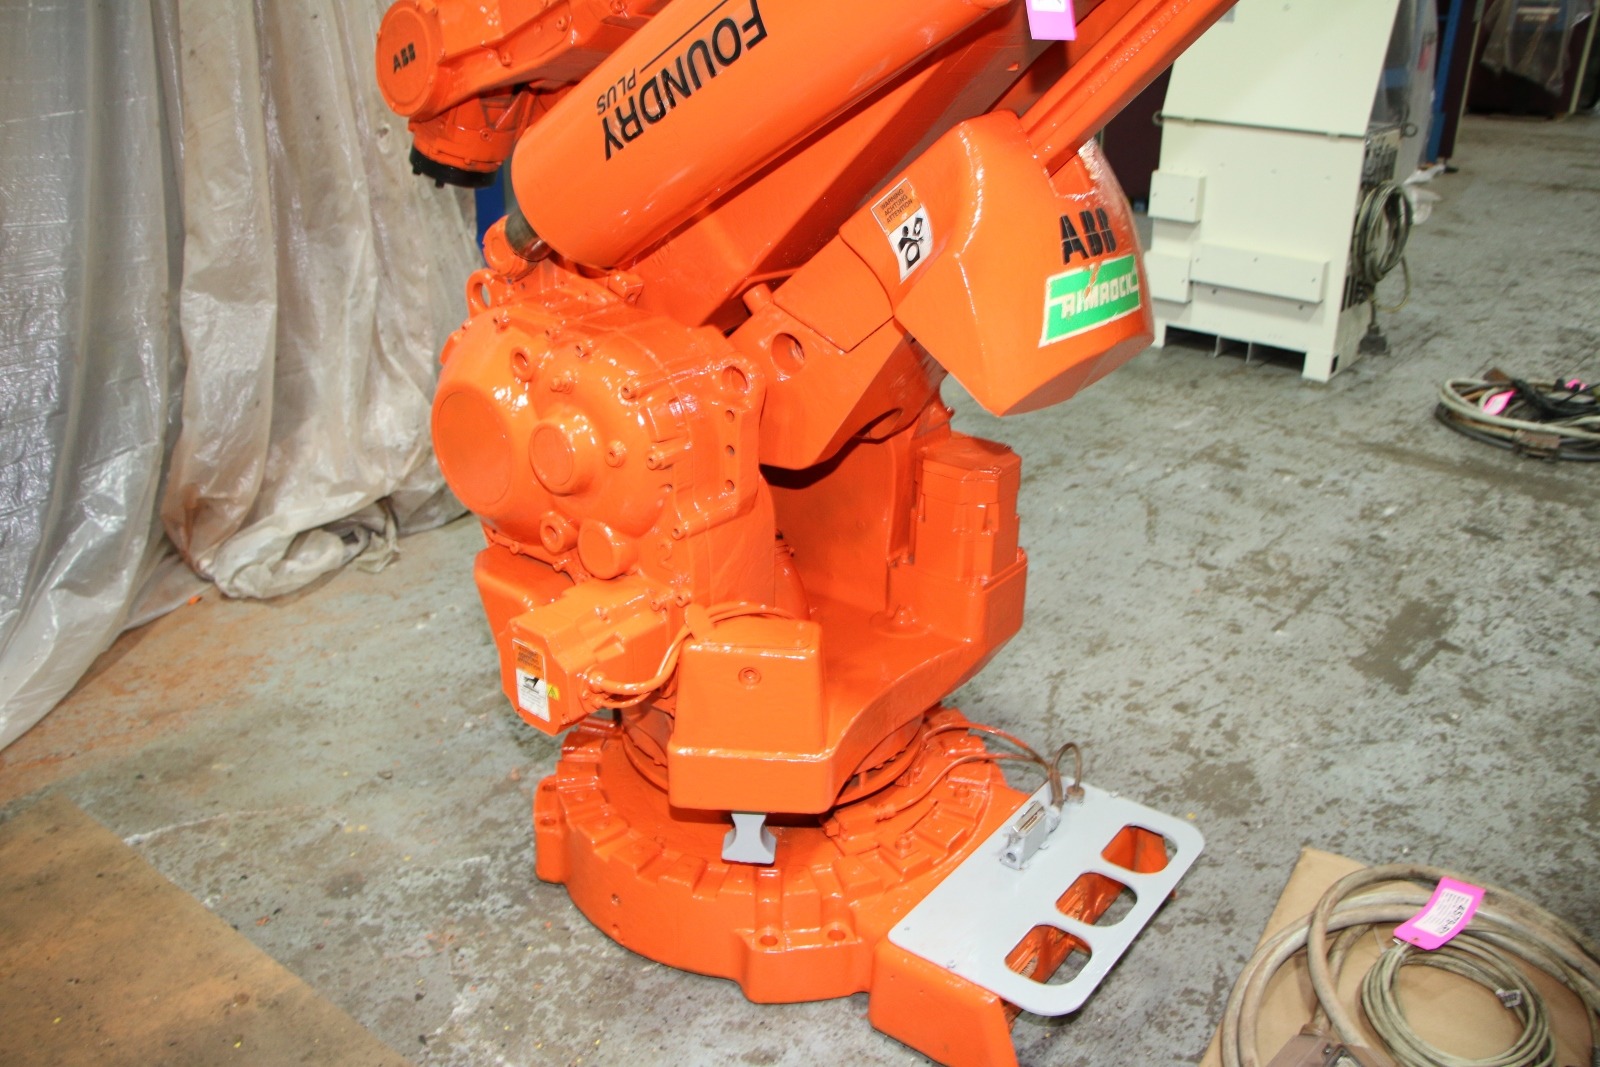 Picture of Used ABB Foundry Robot